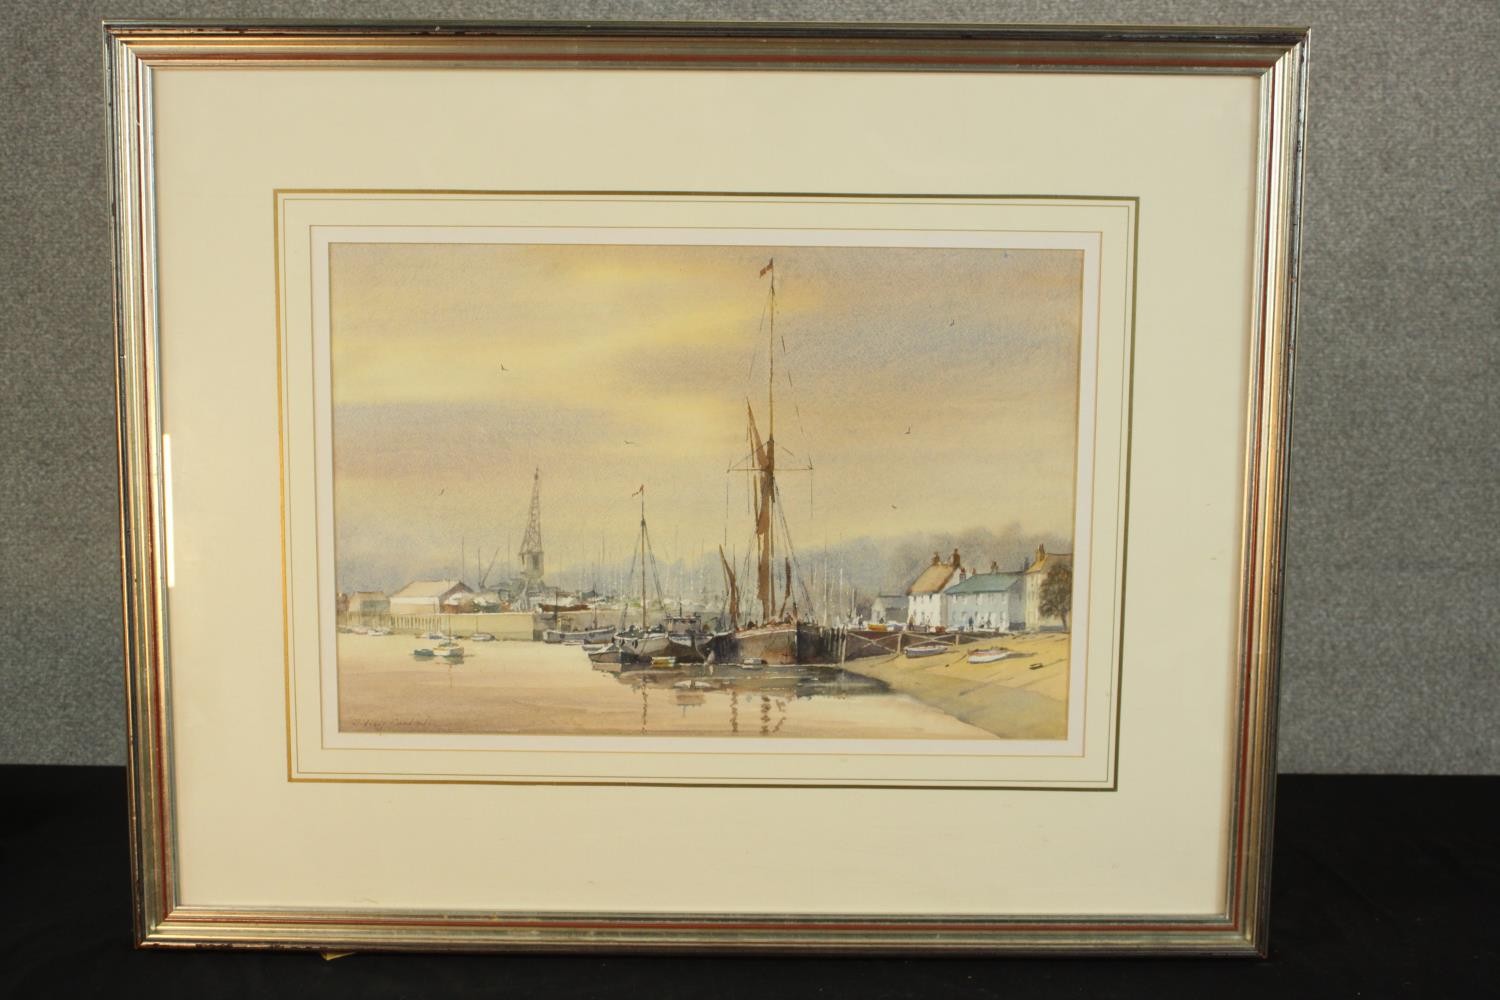 Sidney Cardew (1931 - ), Fishing Boats in the Harbour, watercolour on paper, signed and framed. H.69